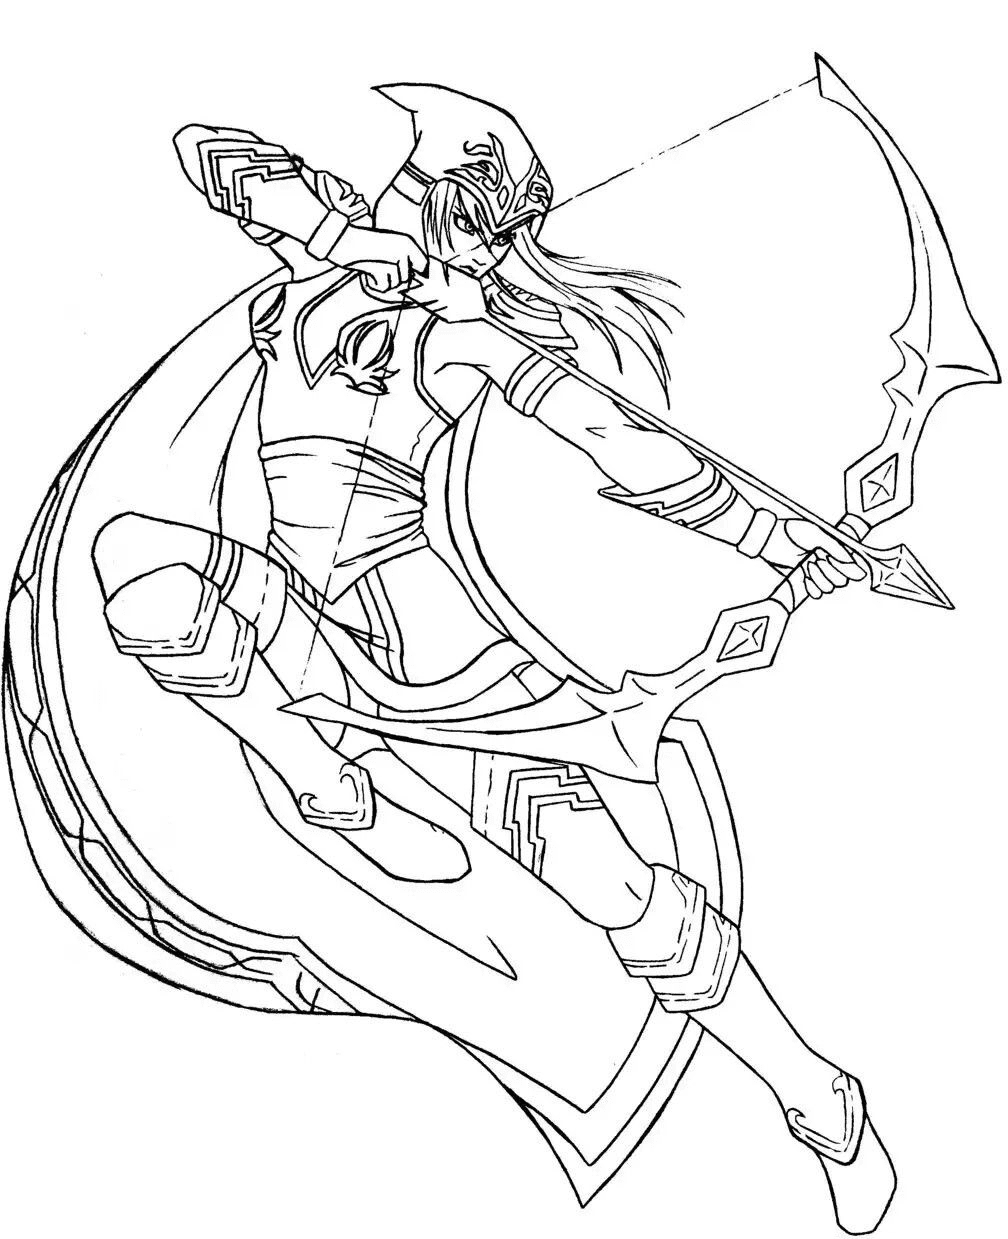 Ashe Coloring Pages